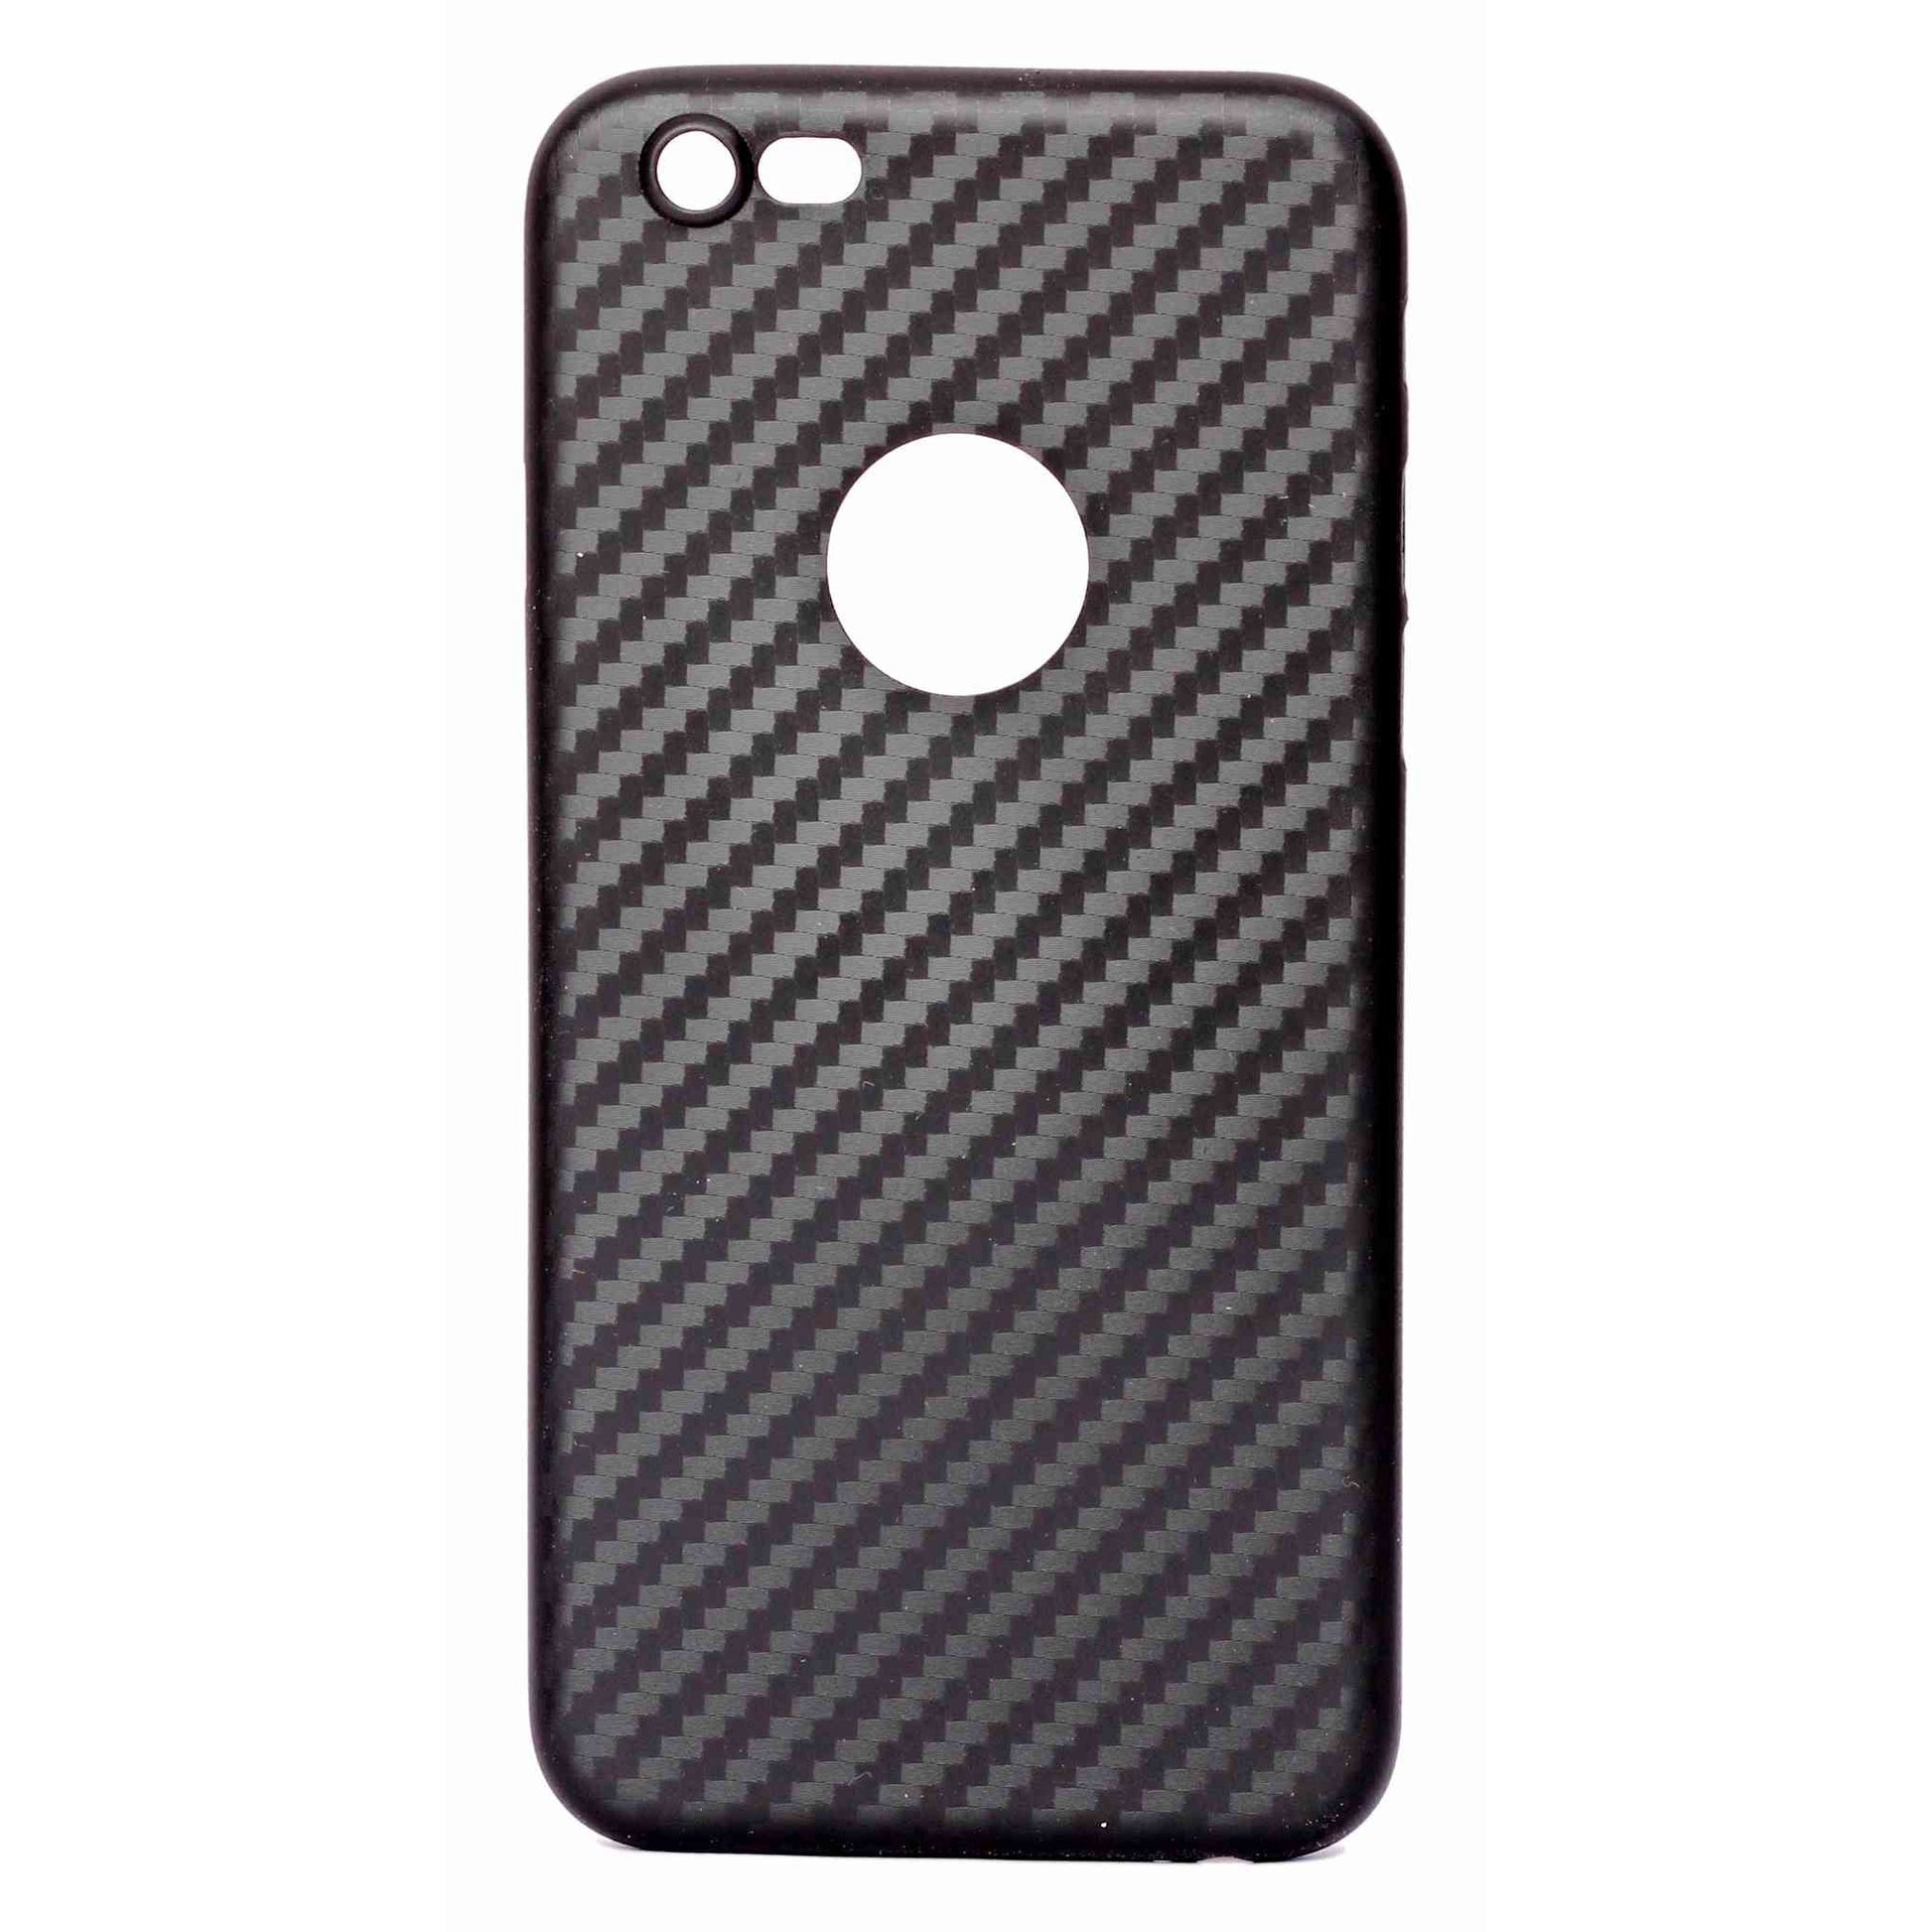 Indian Petals - Polycarbonate 3D Pattern Protective Shock-Proof Anti-Scratch Mobile Back Case Cover for Apple iPhone 6, Black